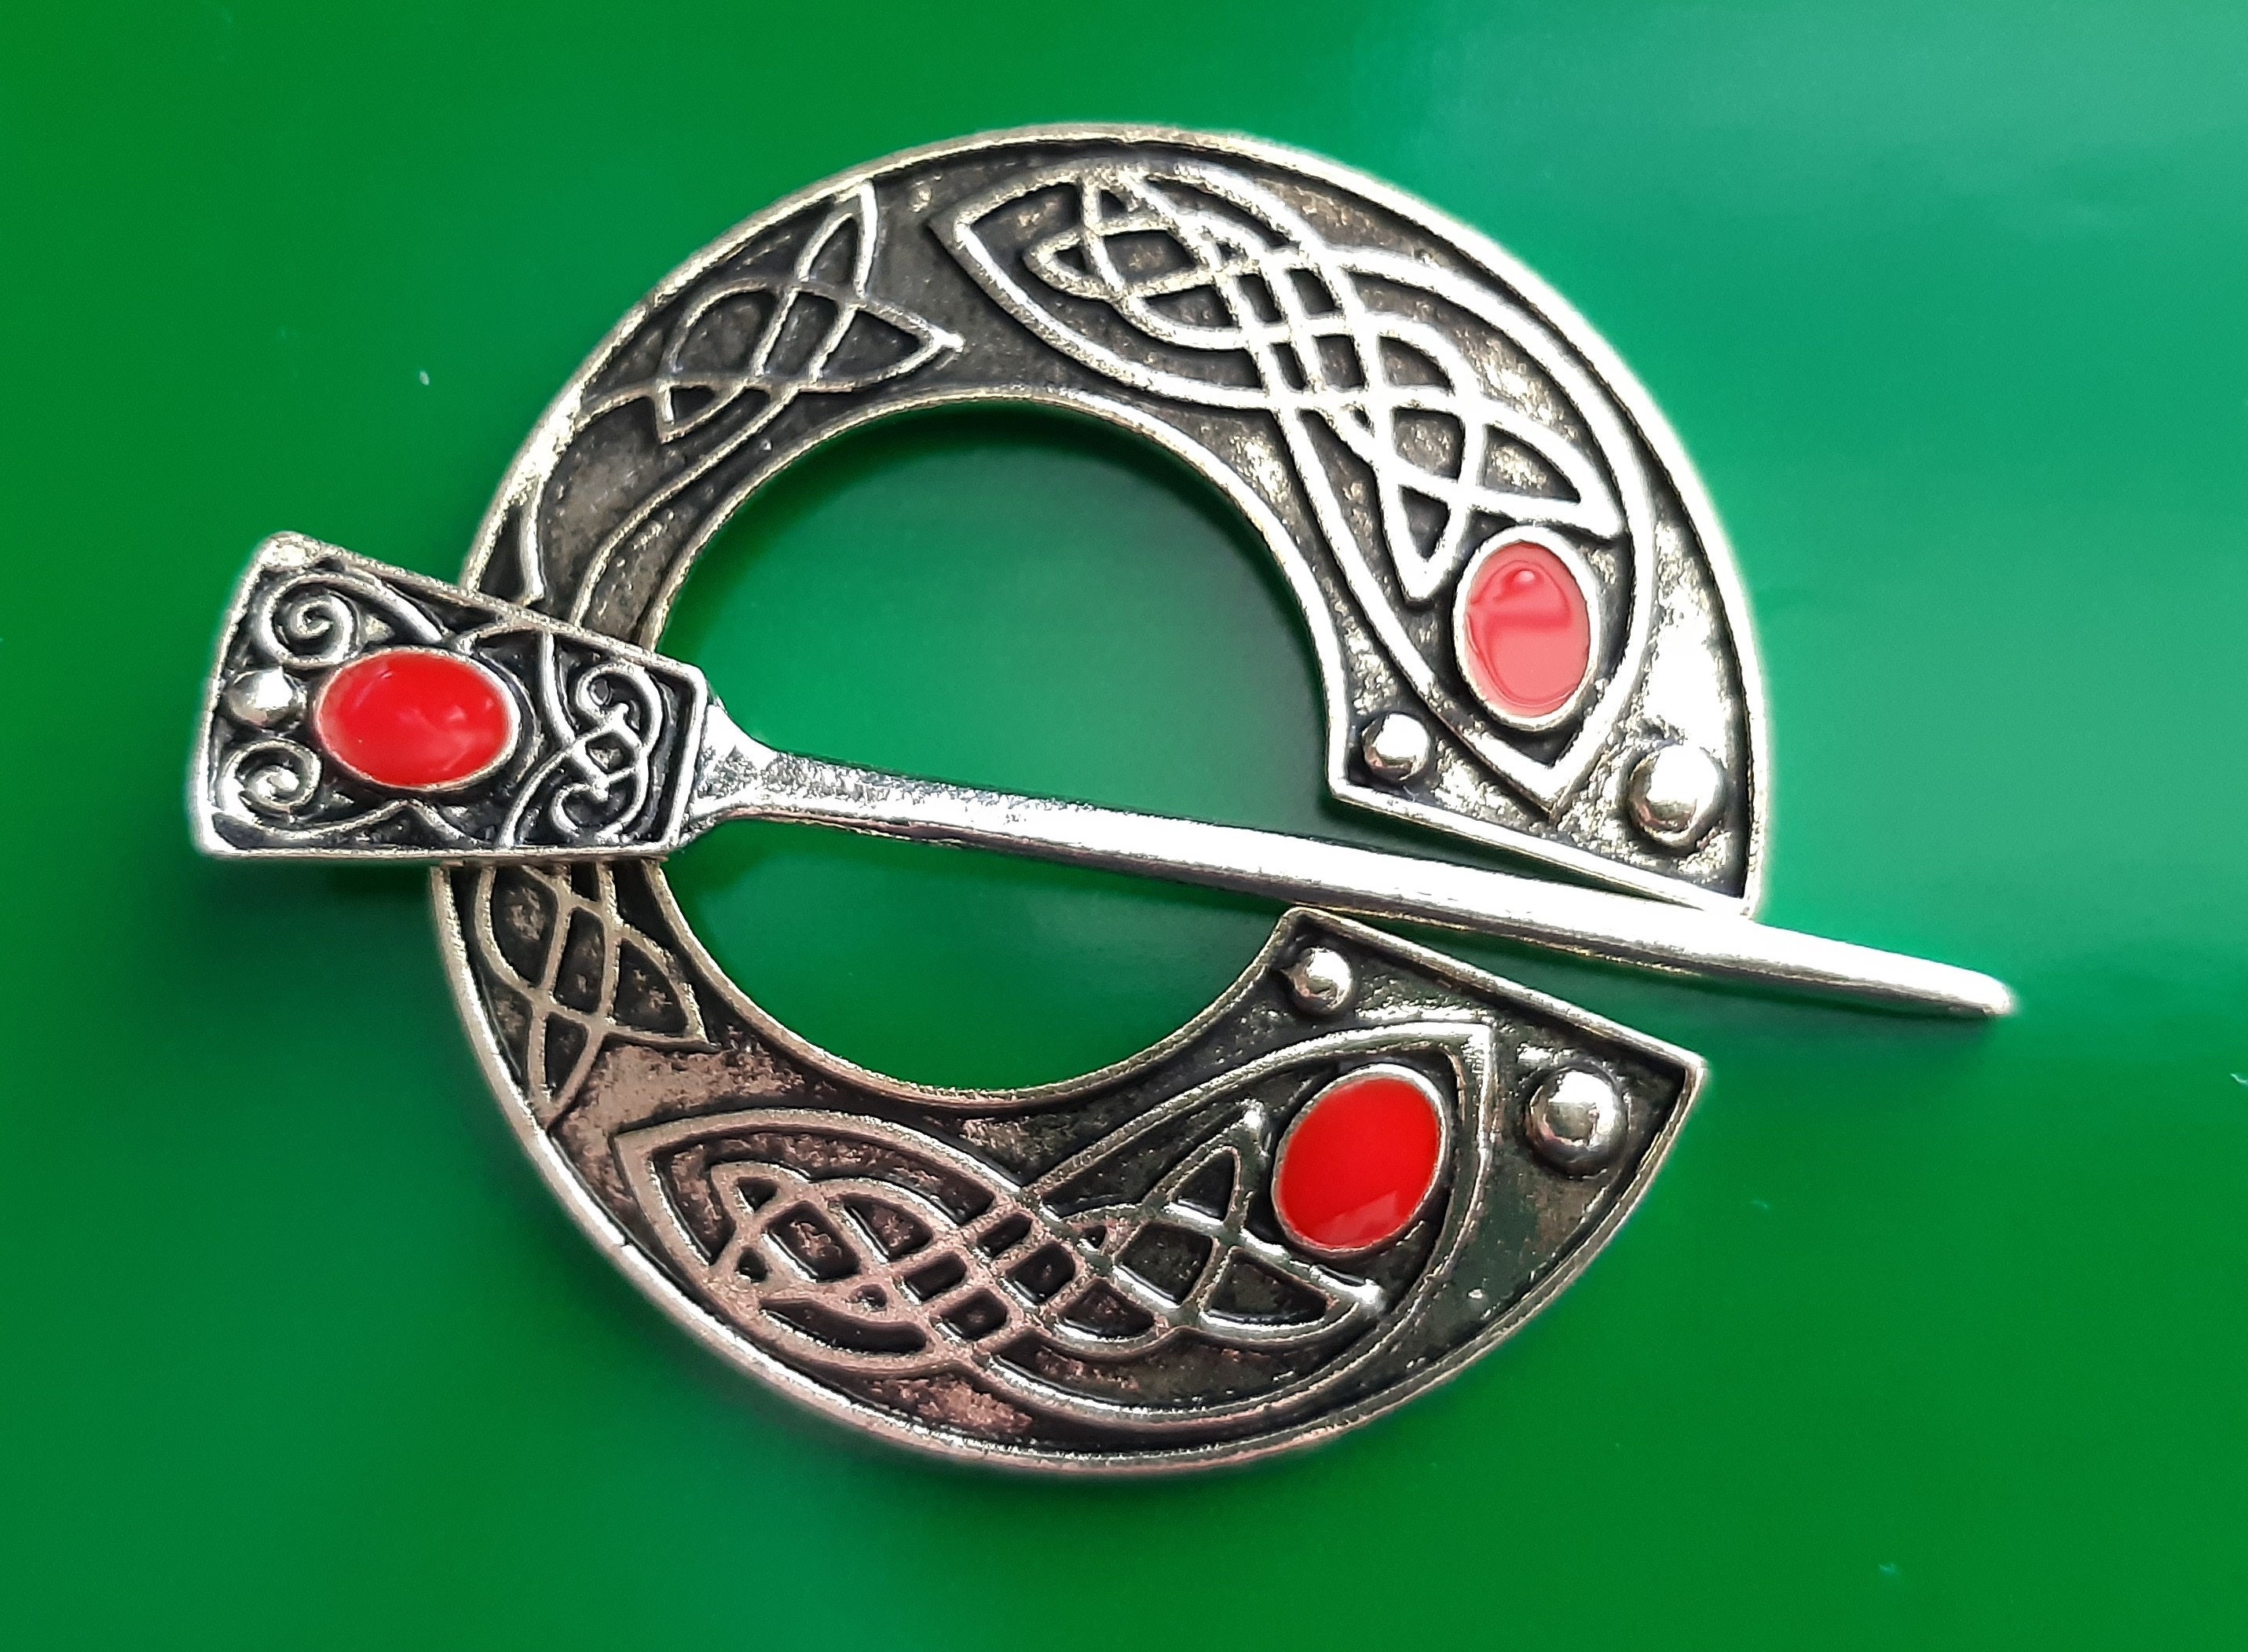 Retro Penannular Brooch Cloak Pin Scarf Buckle Medieval Norse Viking Jewelry - Antique Silver, 3.1x3.8cm Antique Bronze